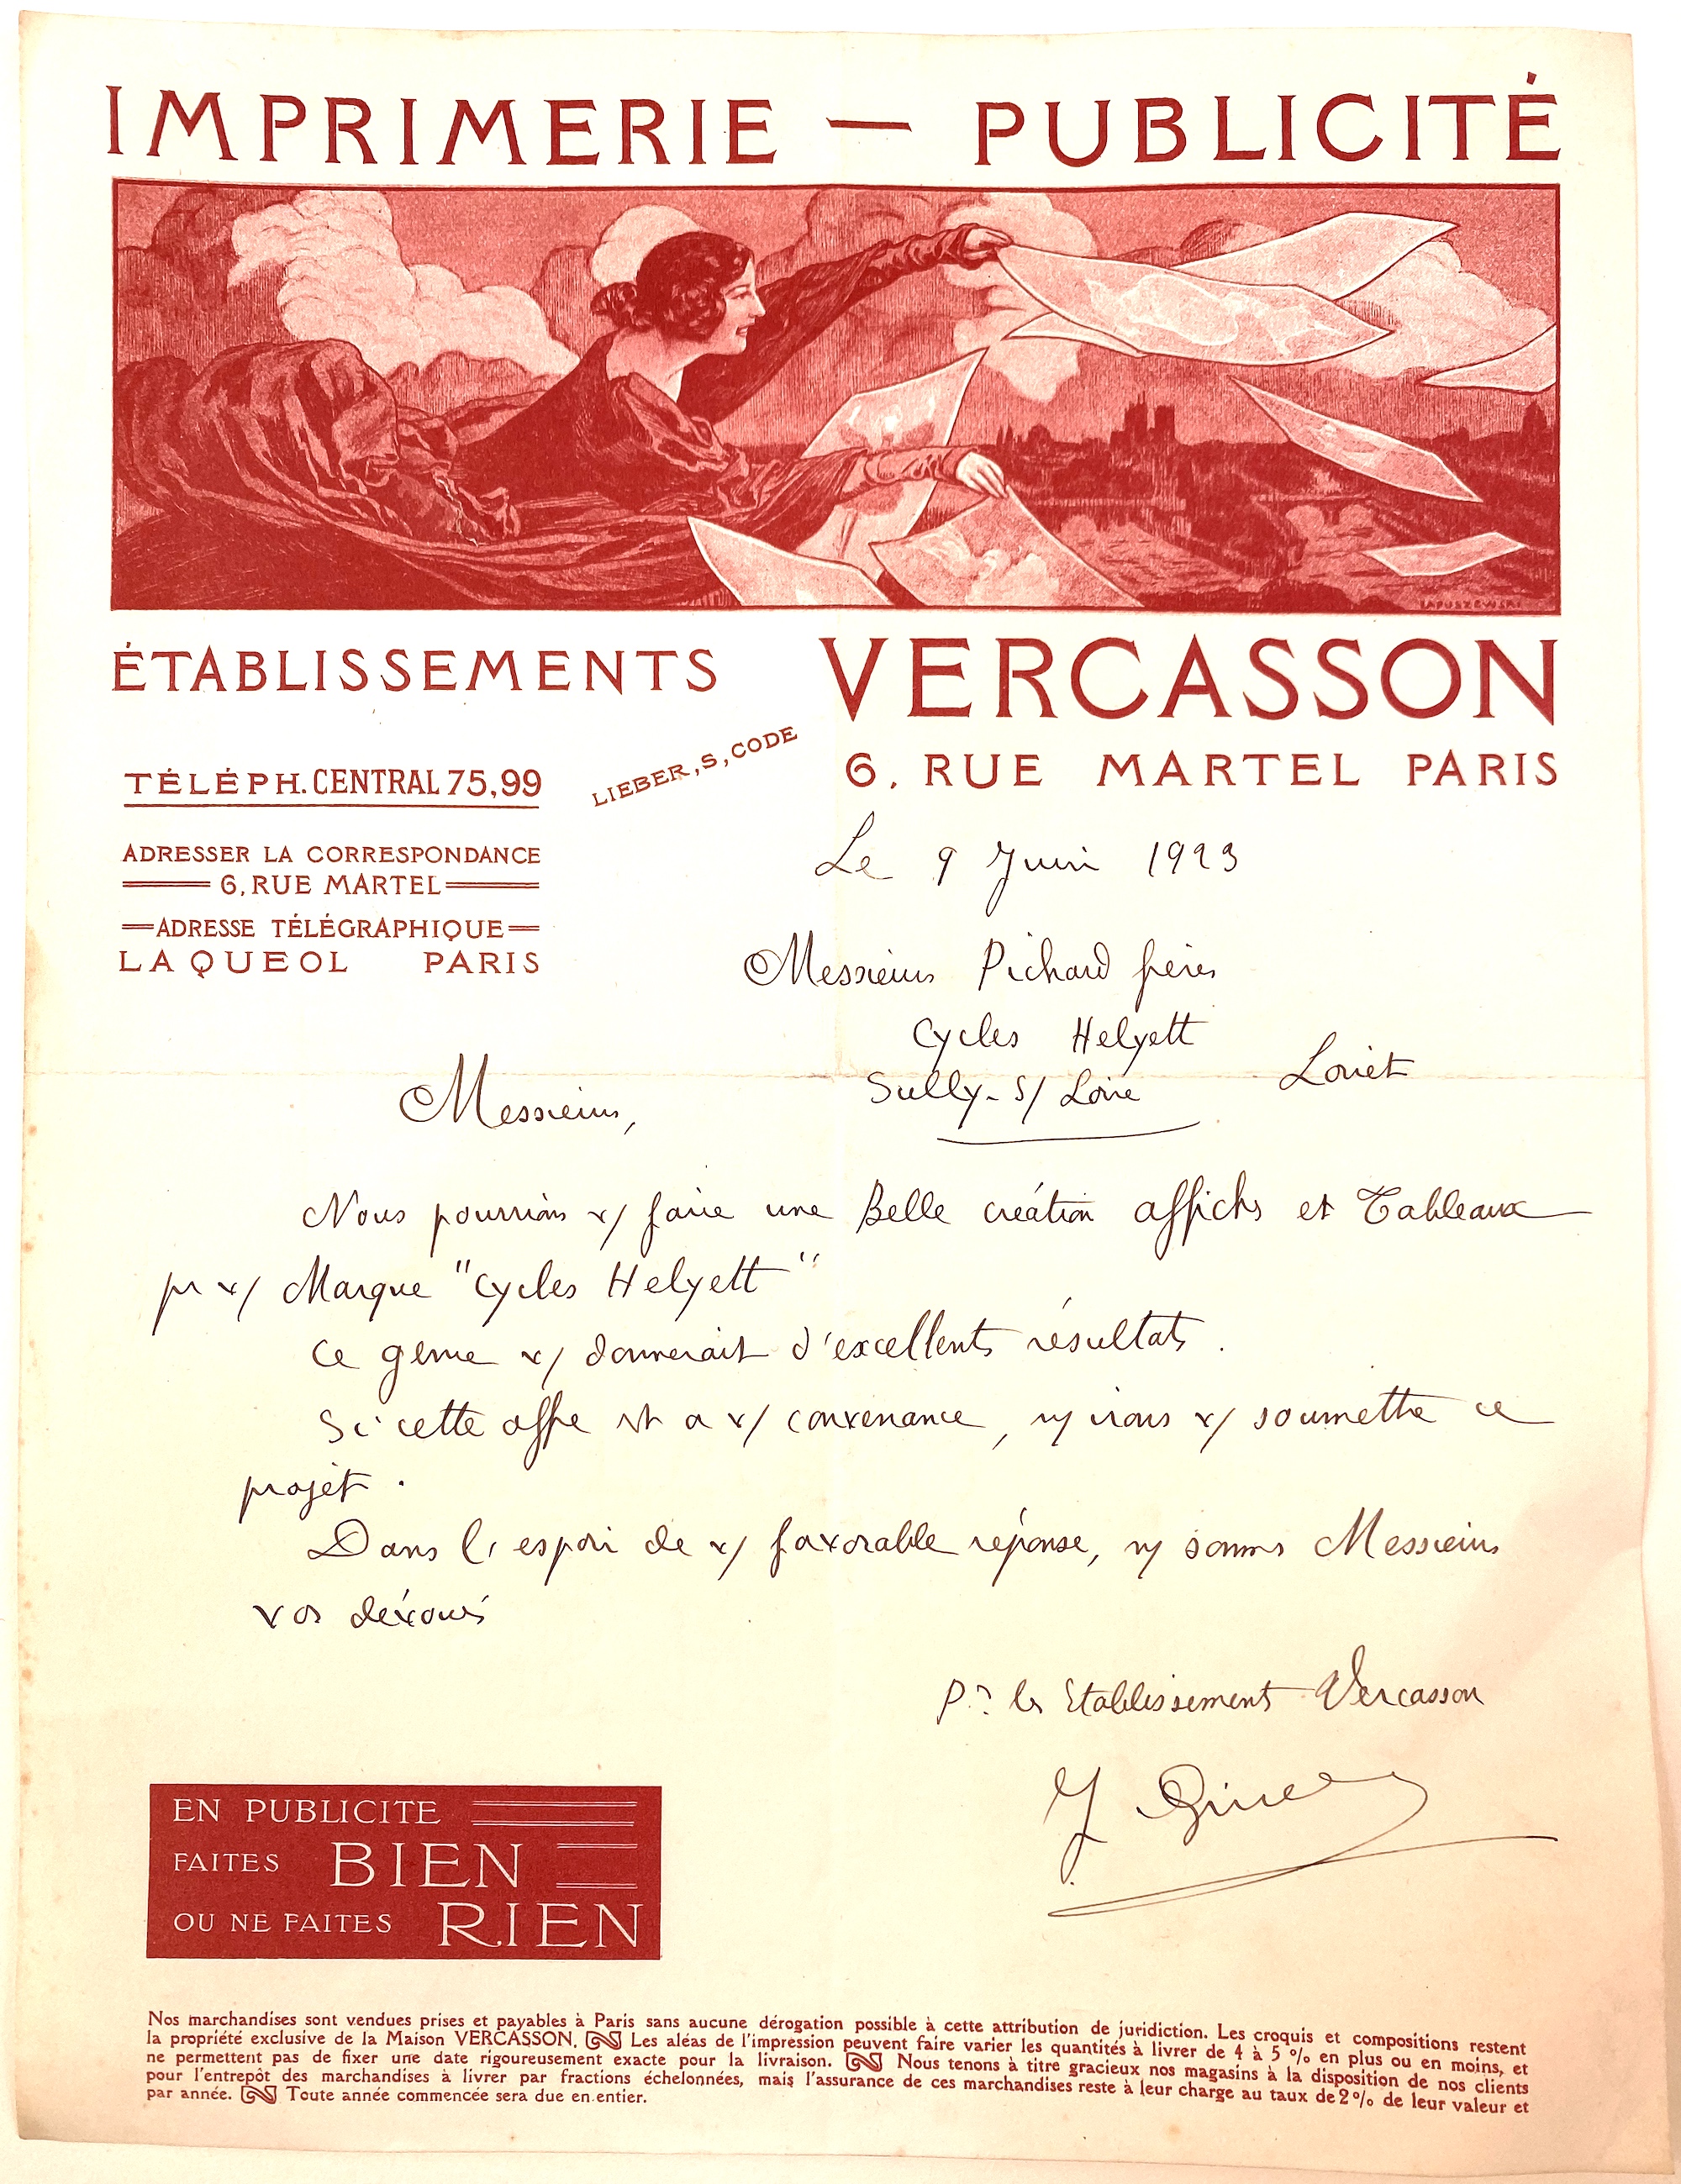 Spectacular letterhead from the Vercasson company showing a woman distributing posters to the four winds.